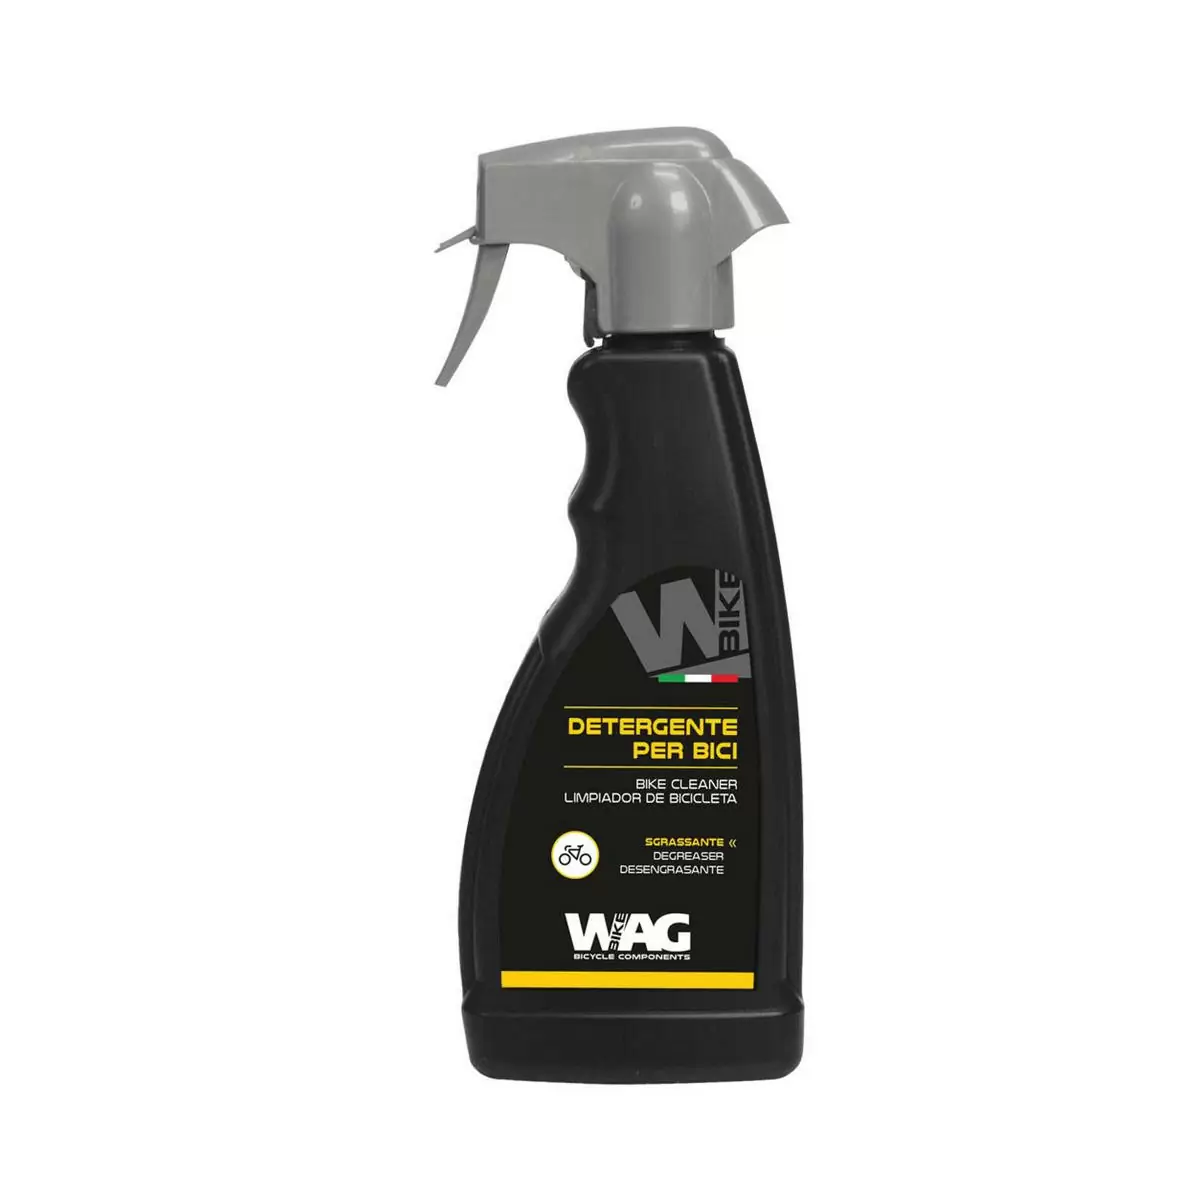 bike cleaner and degreaser spray 500ml - image